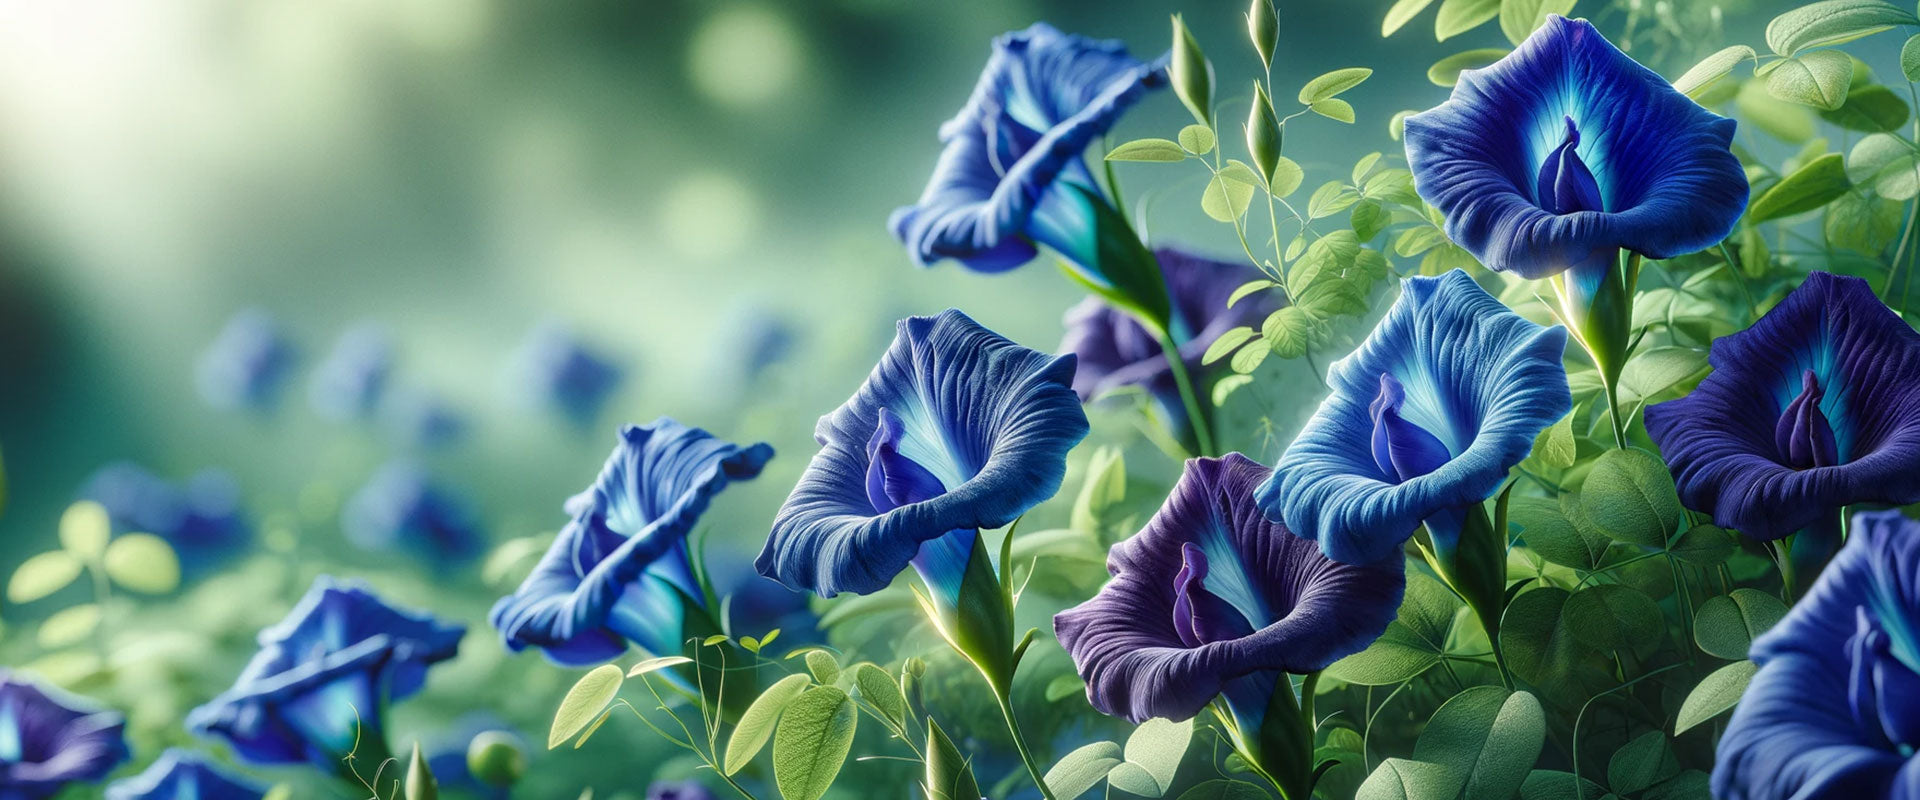 butterfly pea flowers for natural blue food coloring dye